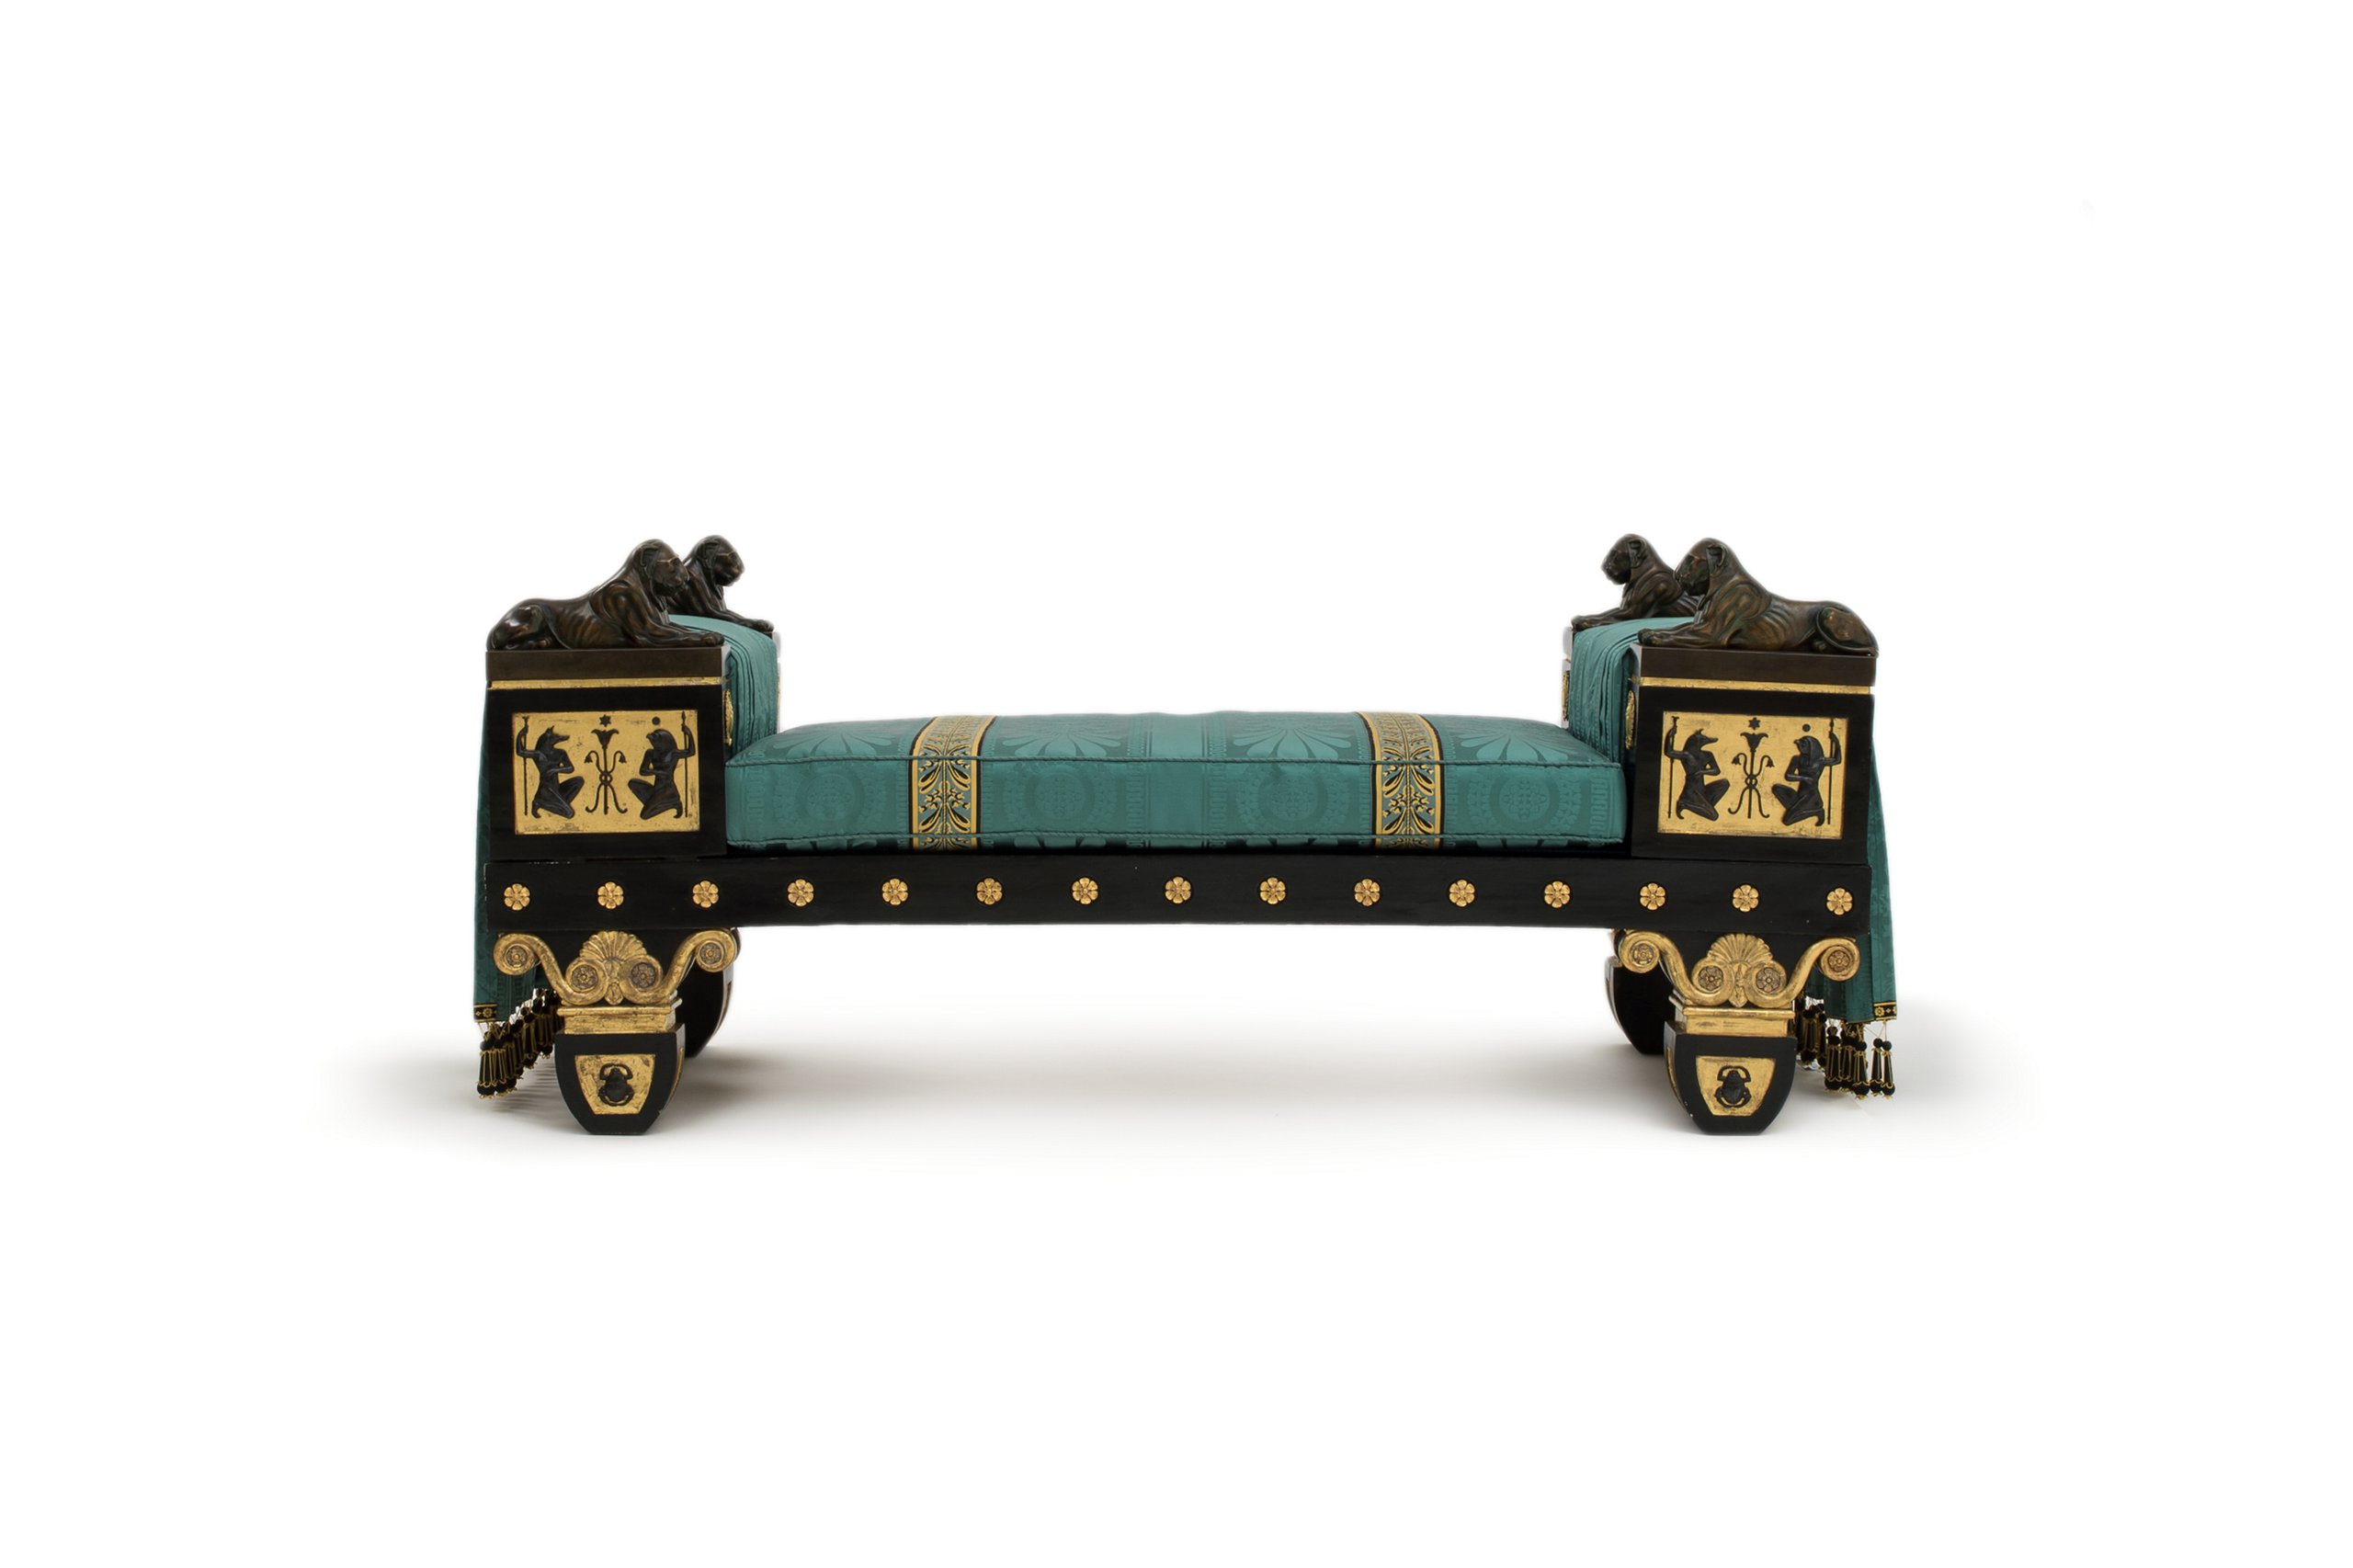 Regency Egyptian Revival style settee by Thomas Hope